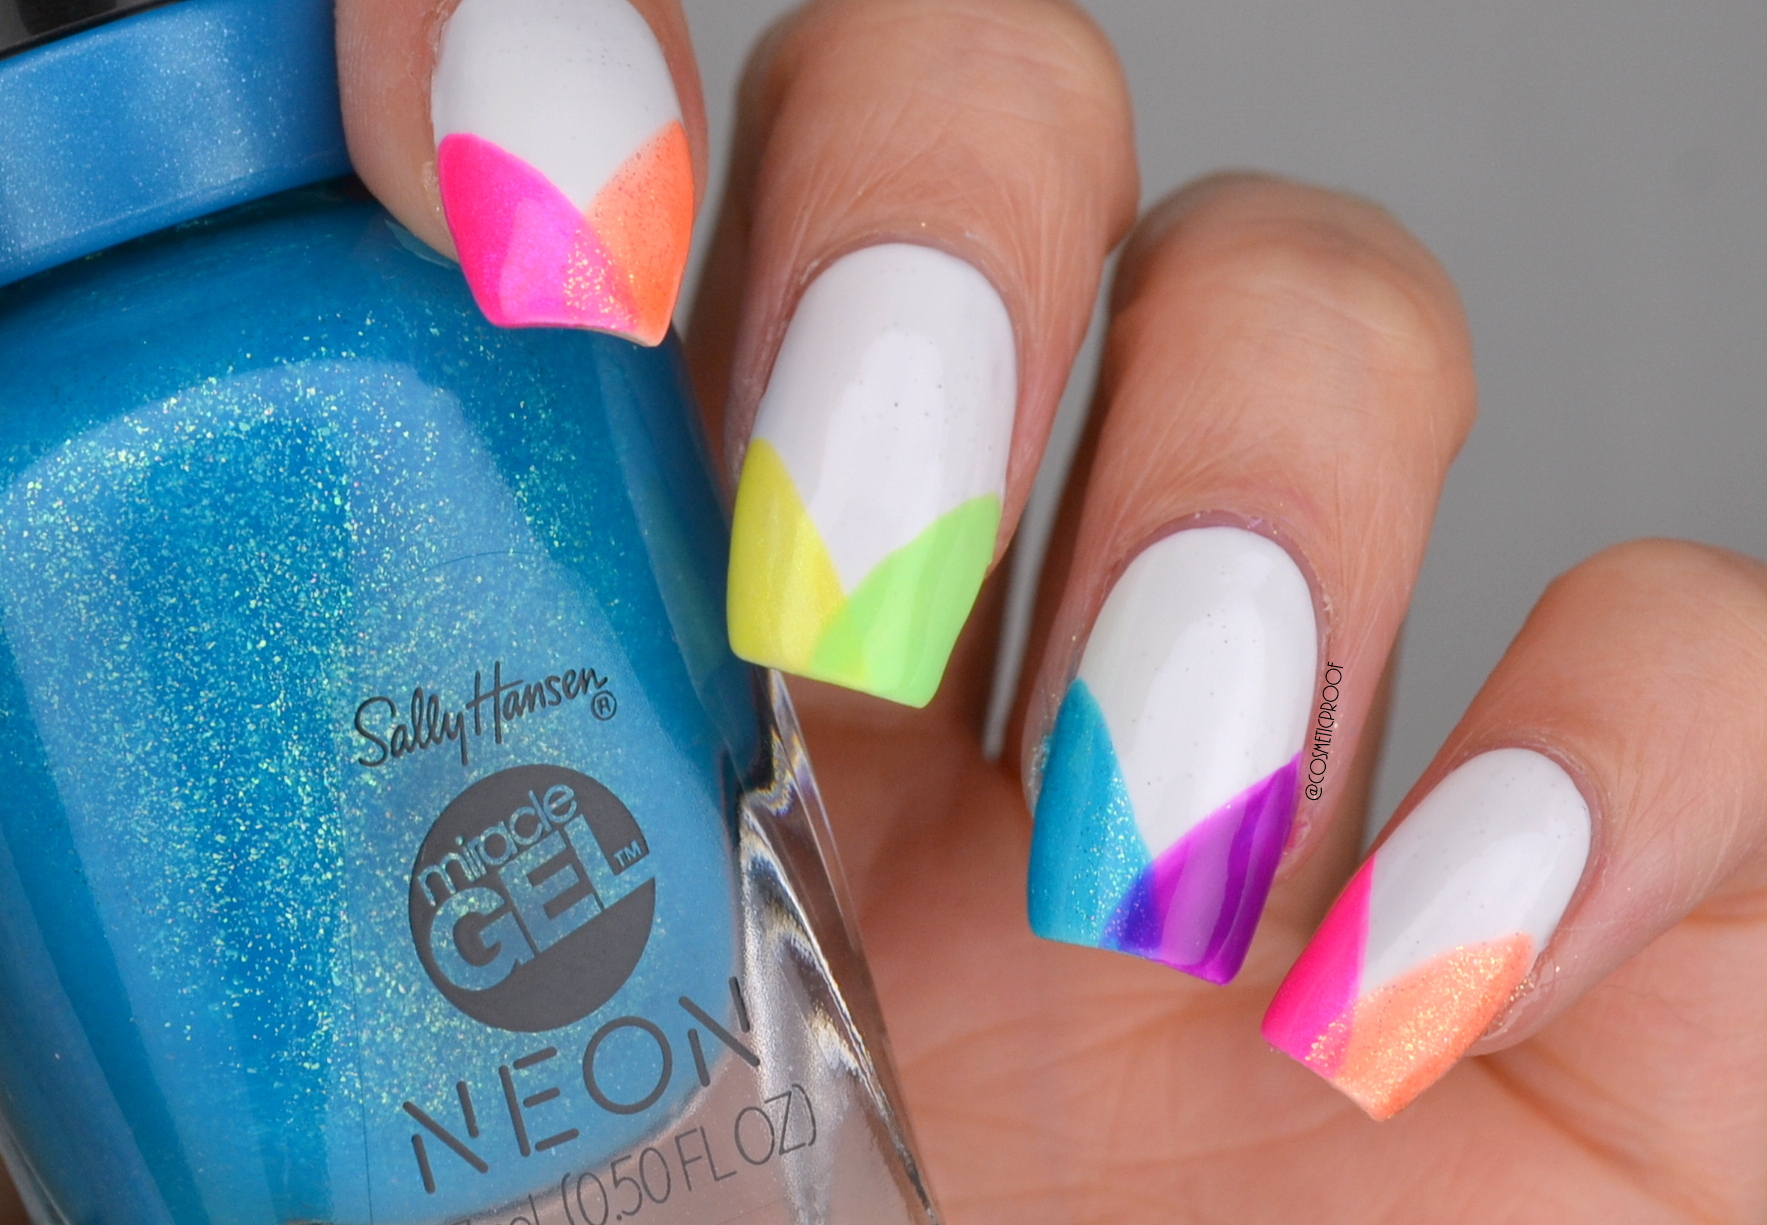 1. Neon Nail Art Designs for Beginners - wide 5